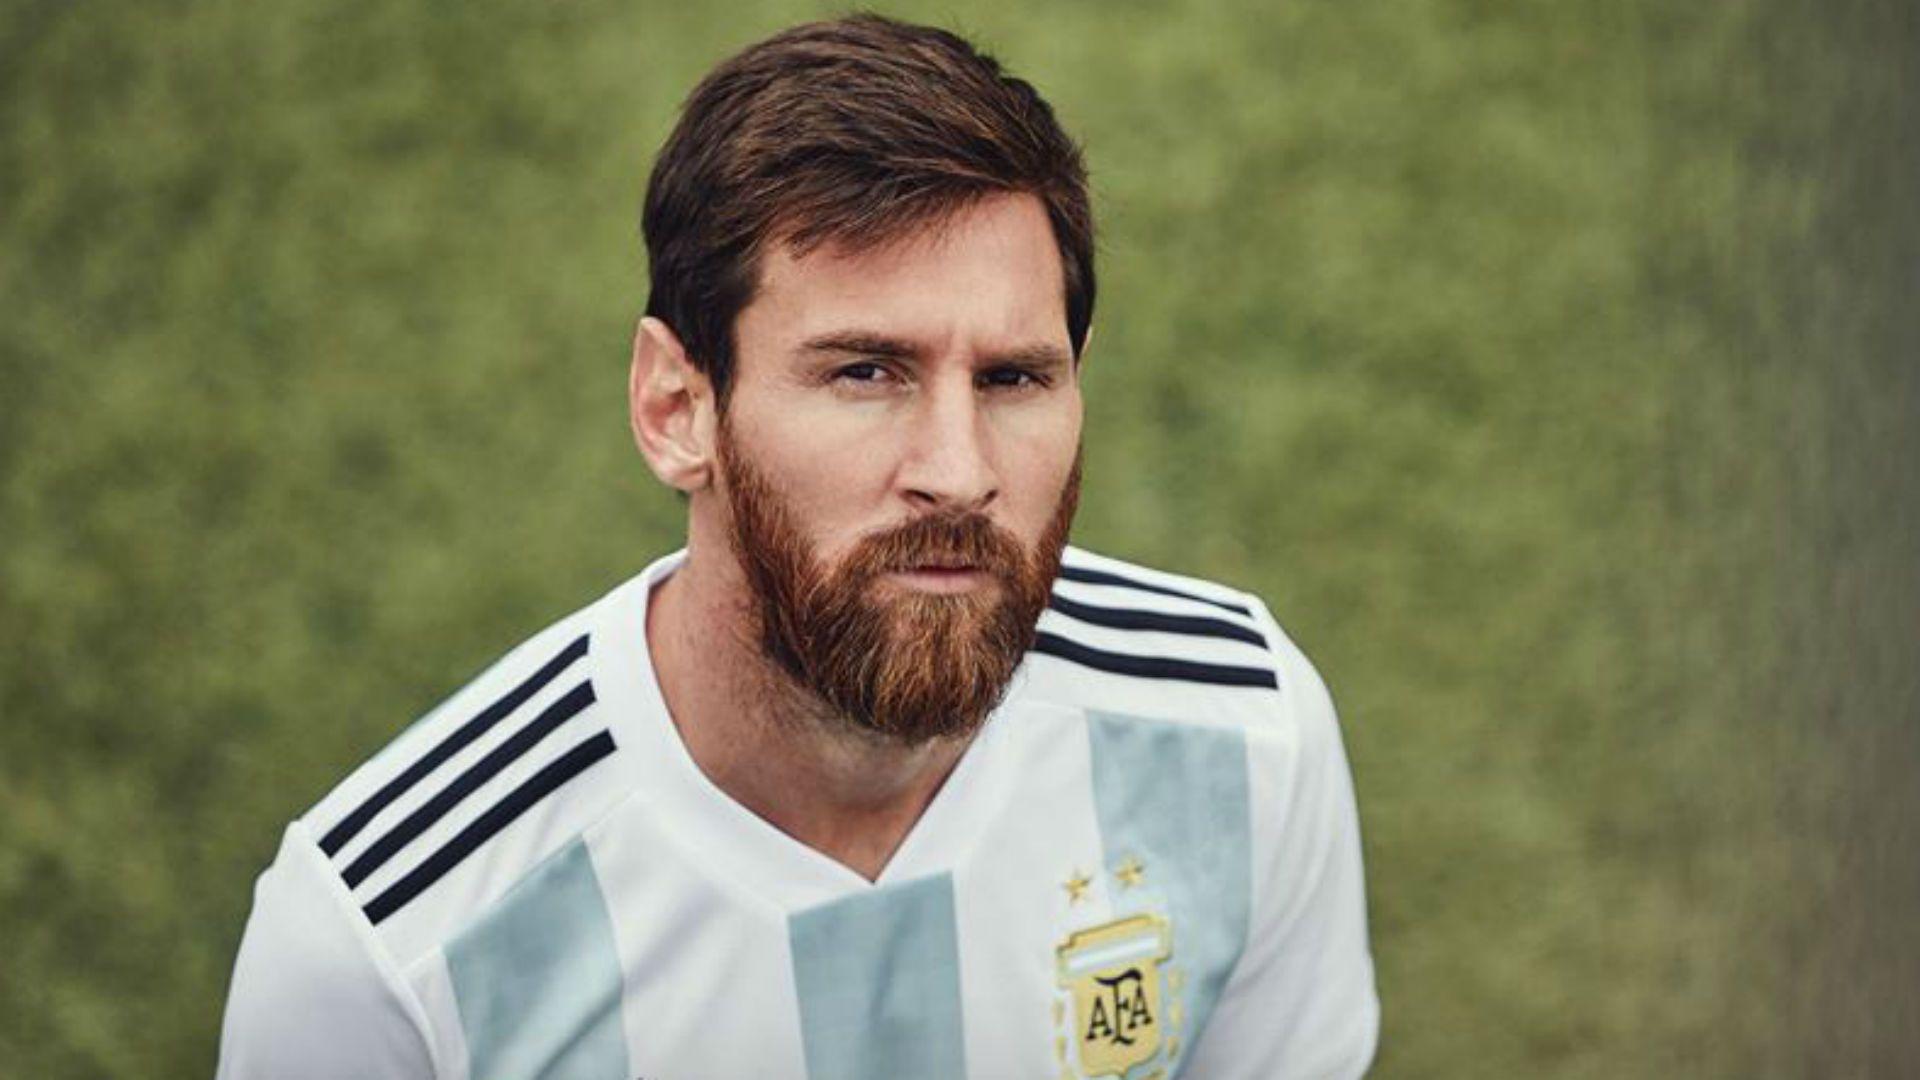 Barcelona star Lionel Messi admits 2018 World Cup is last chance at